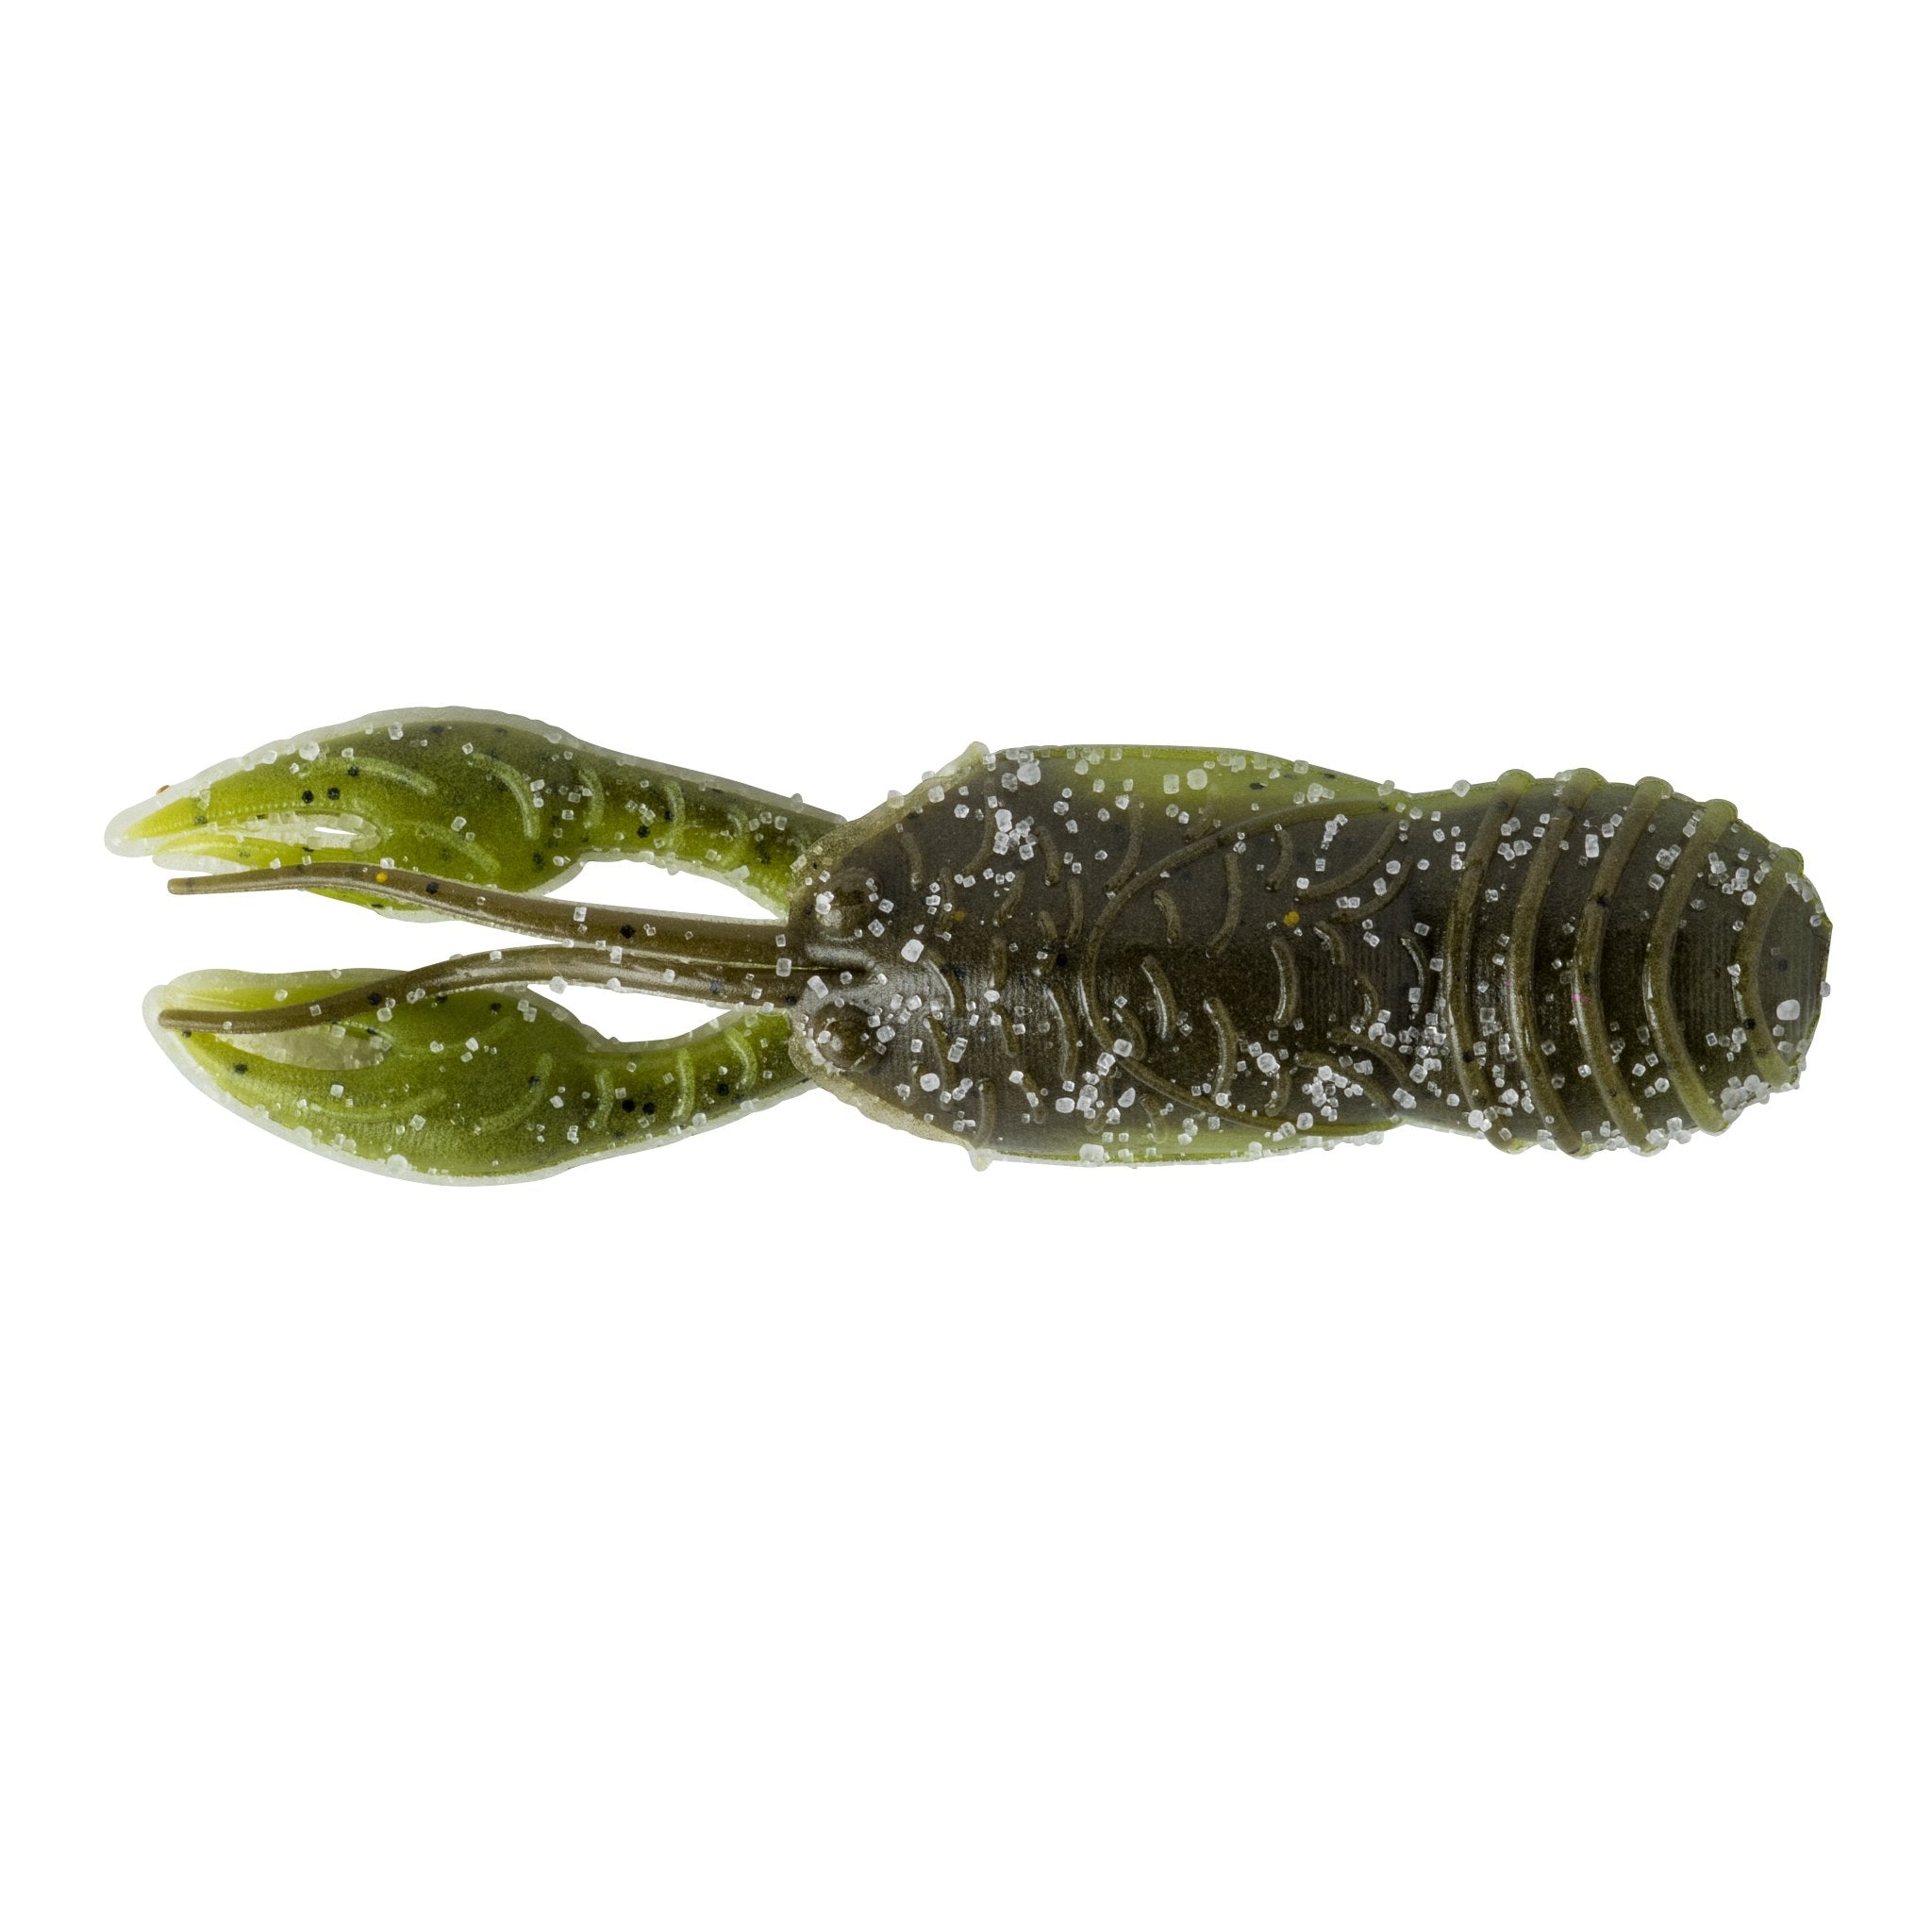 Great Lakes Finesse 2.5 Juvy Craw Green Pumpkin